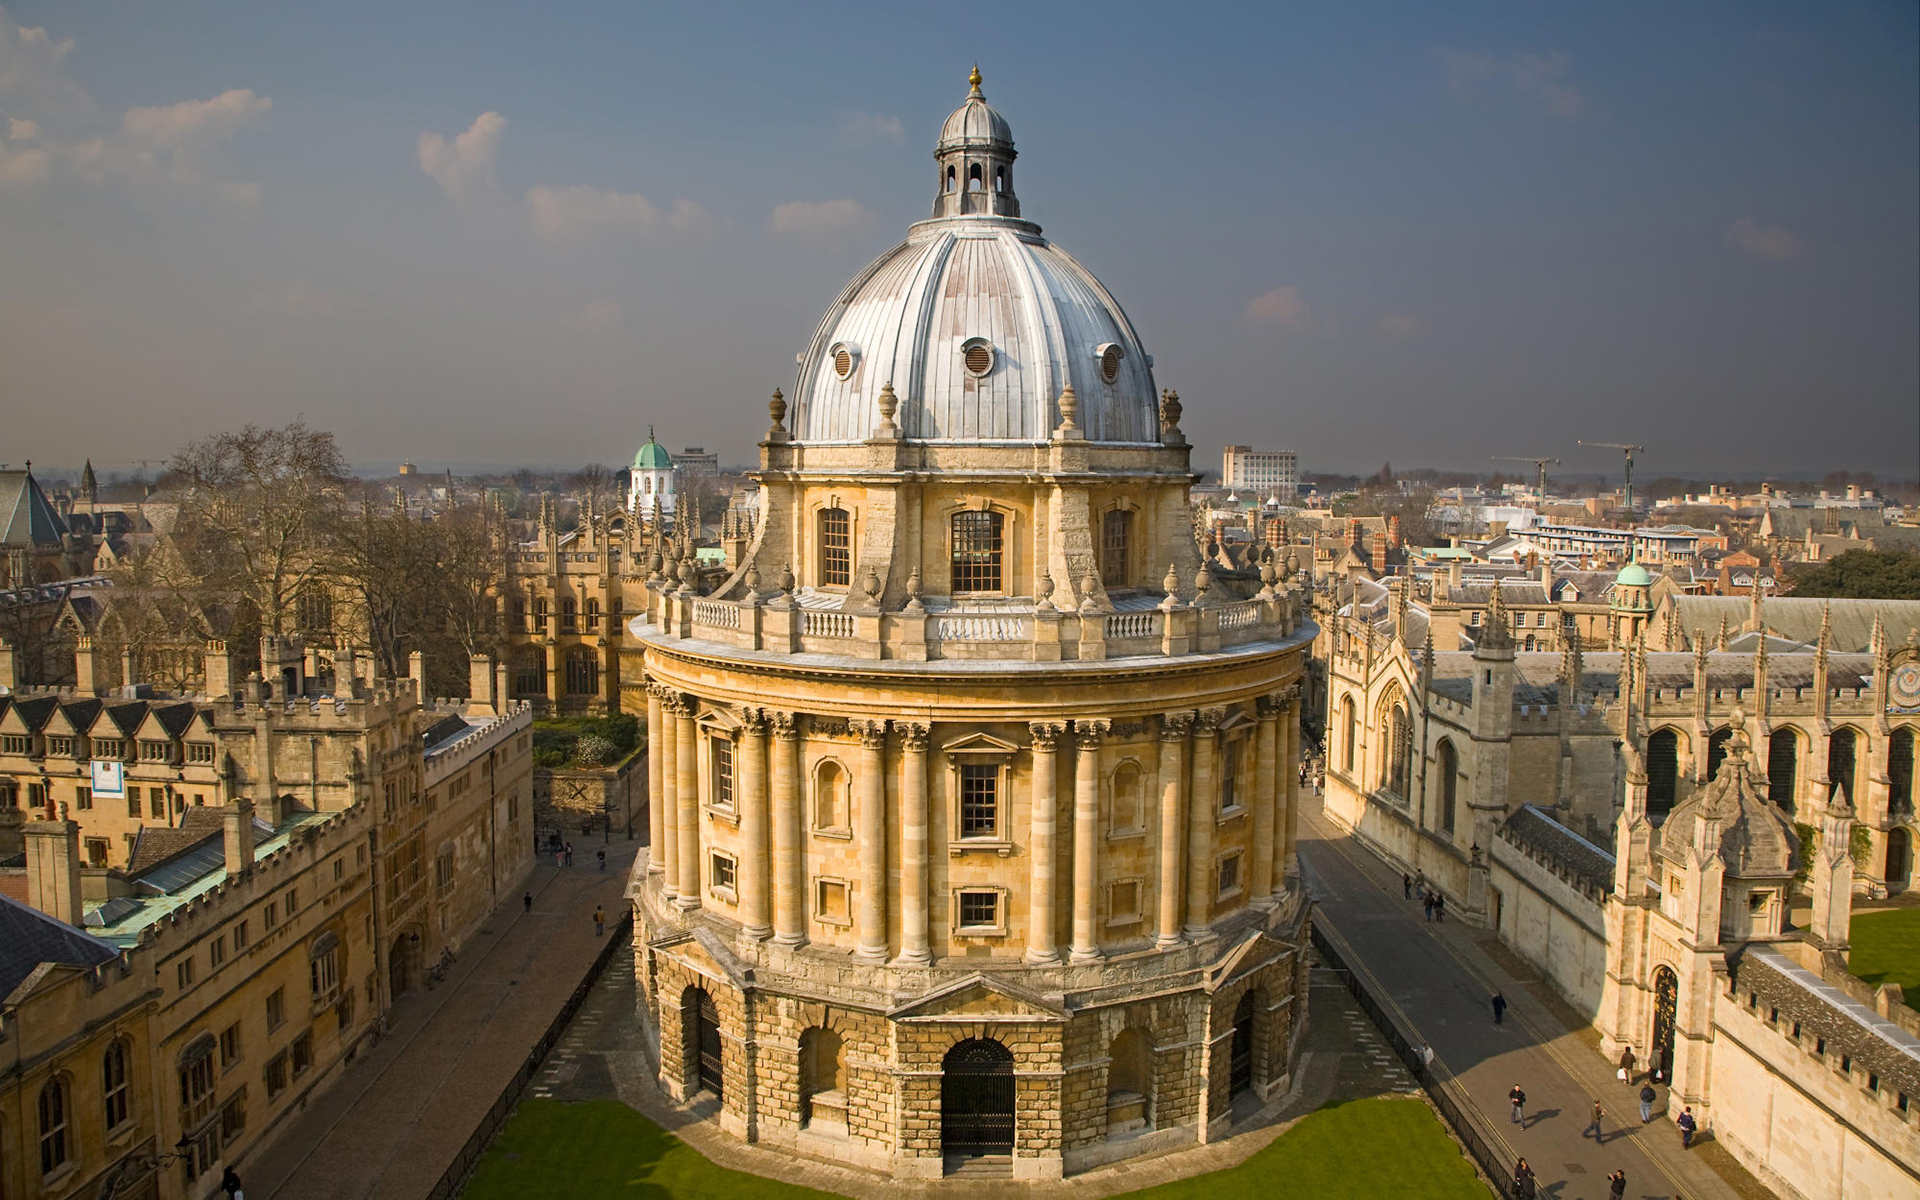 man made, oxford, architecture, building, dome, cities